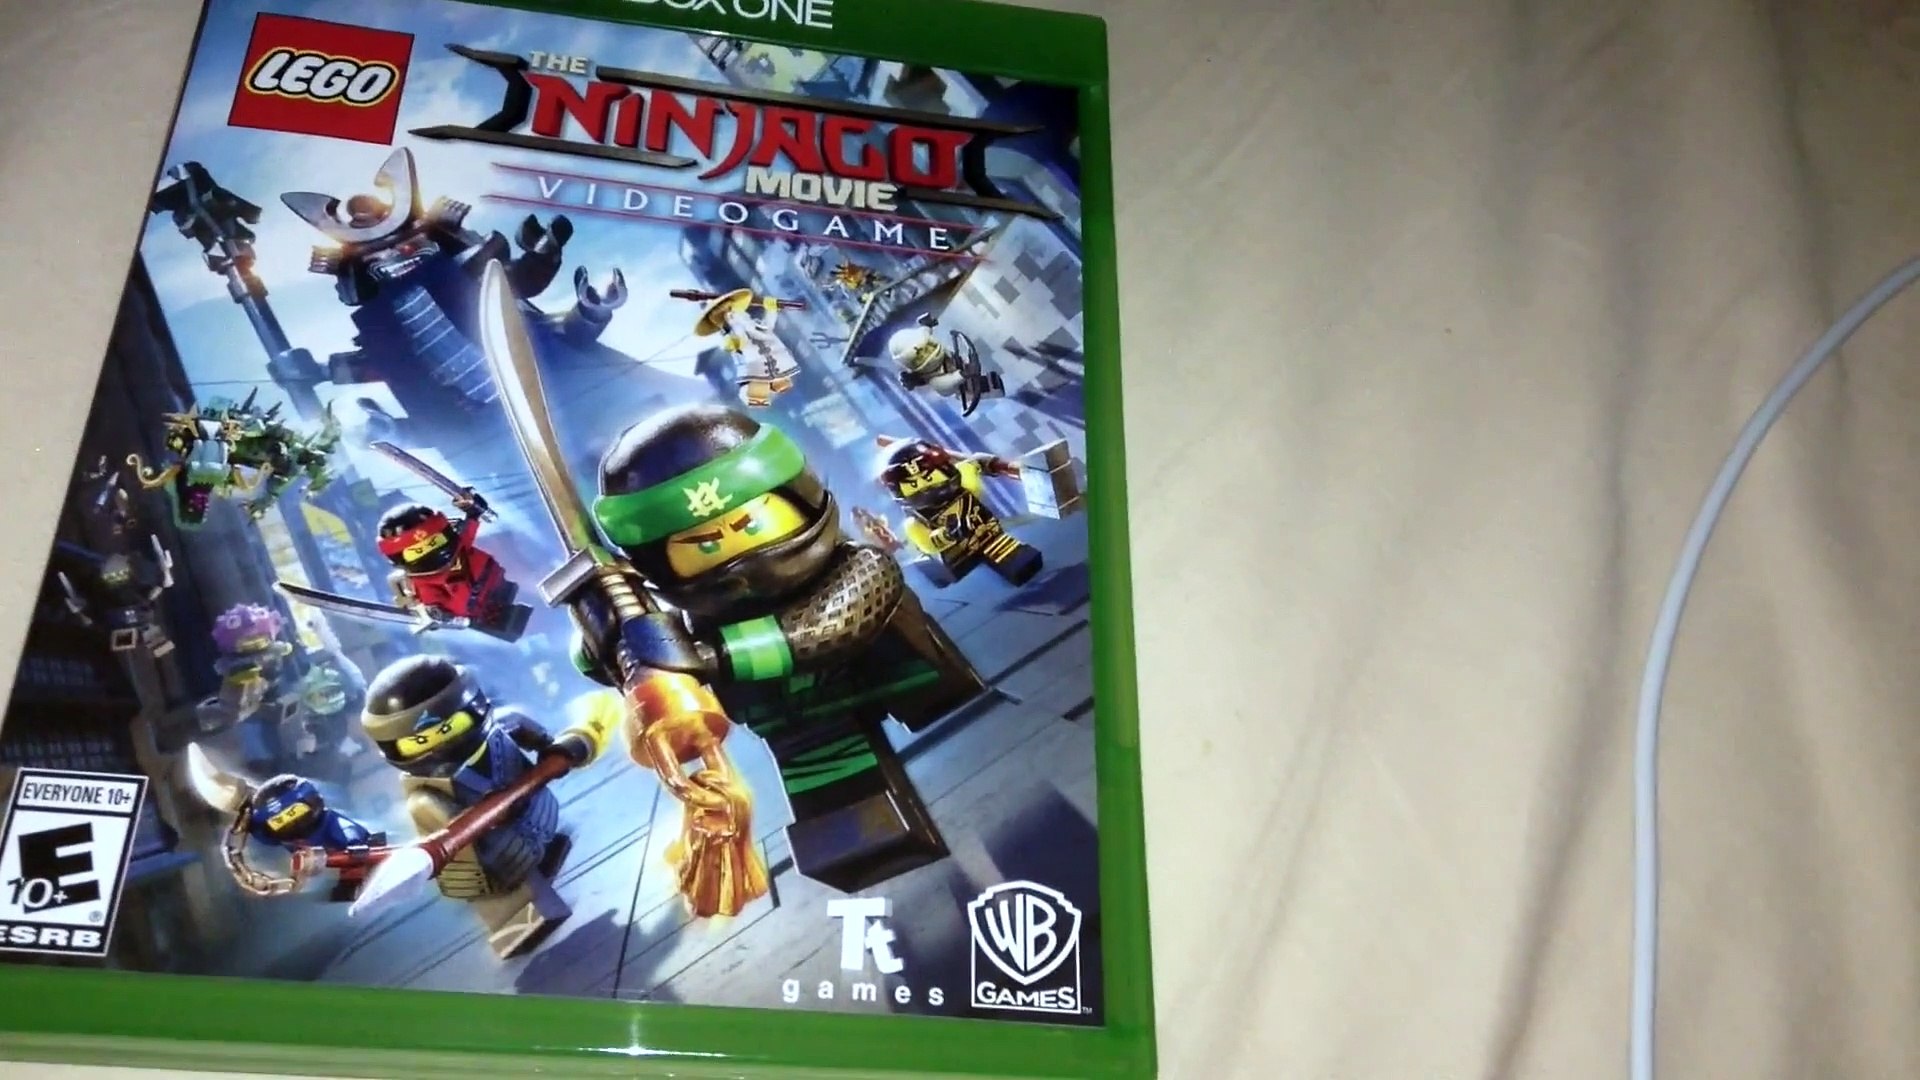 The Lego Ninjago Video Game (Xbox One) Unboxing - video Dailymotion